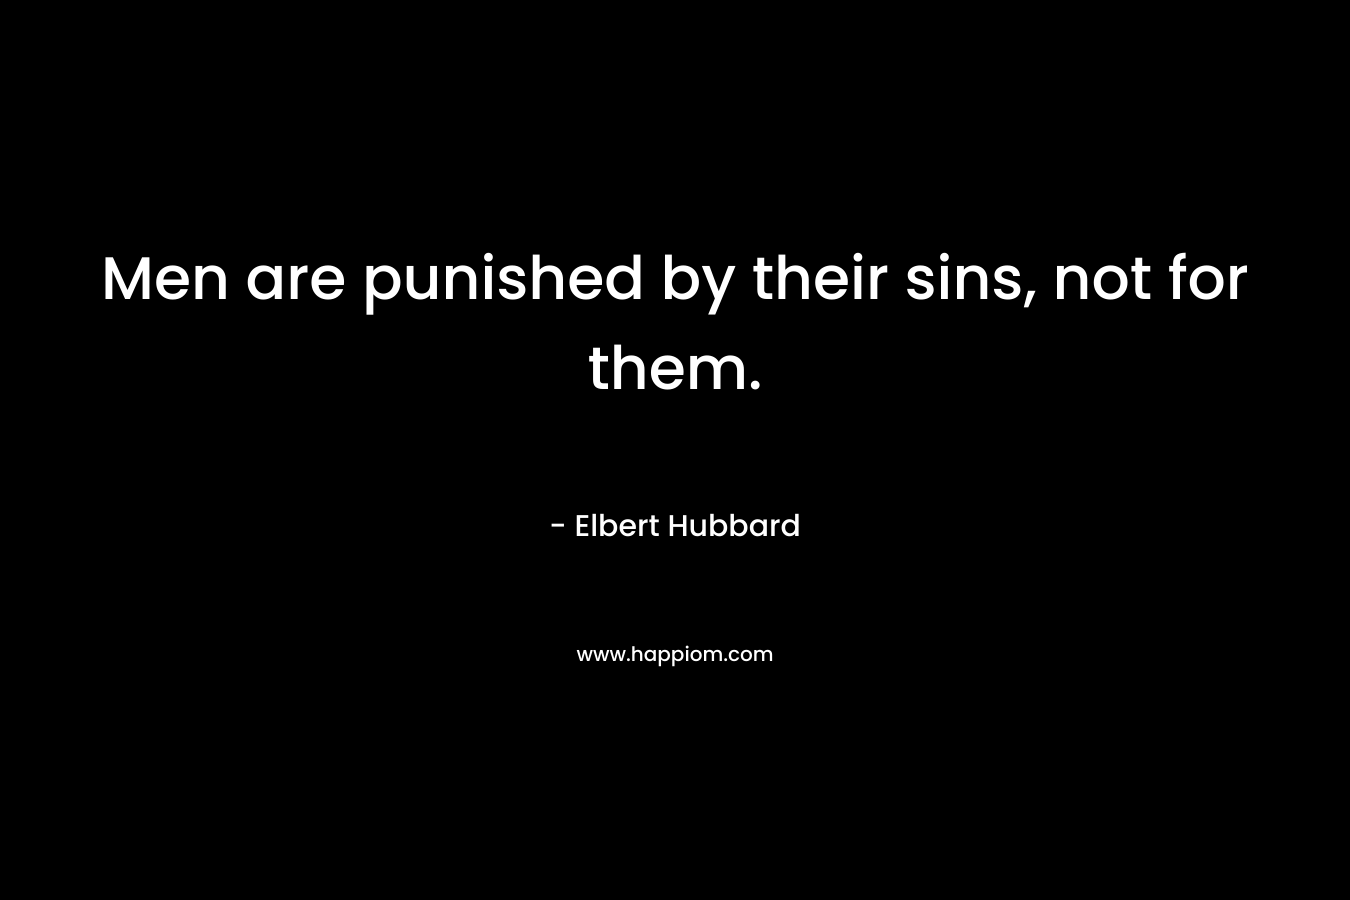 Men are punished by their sins, not for them.